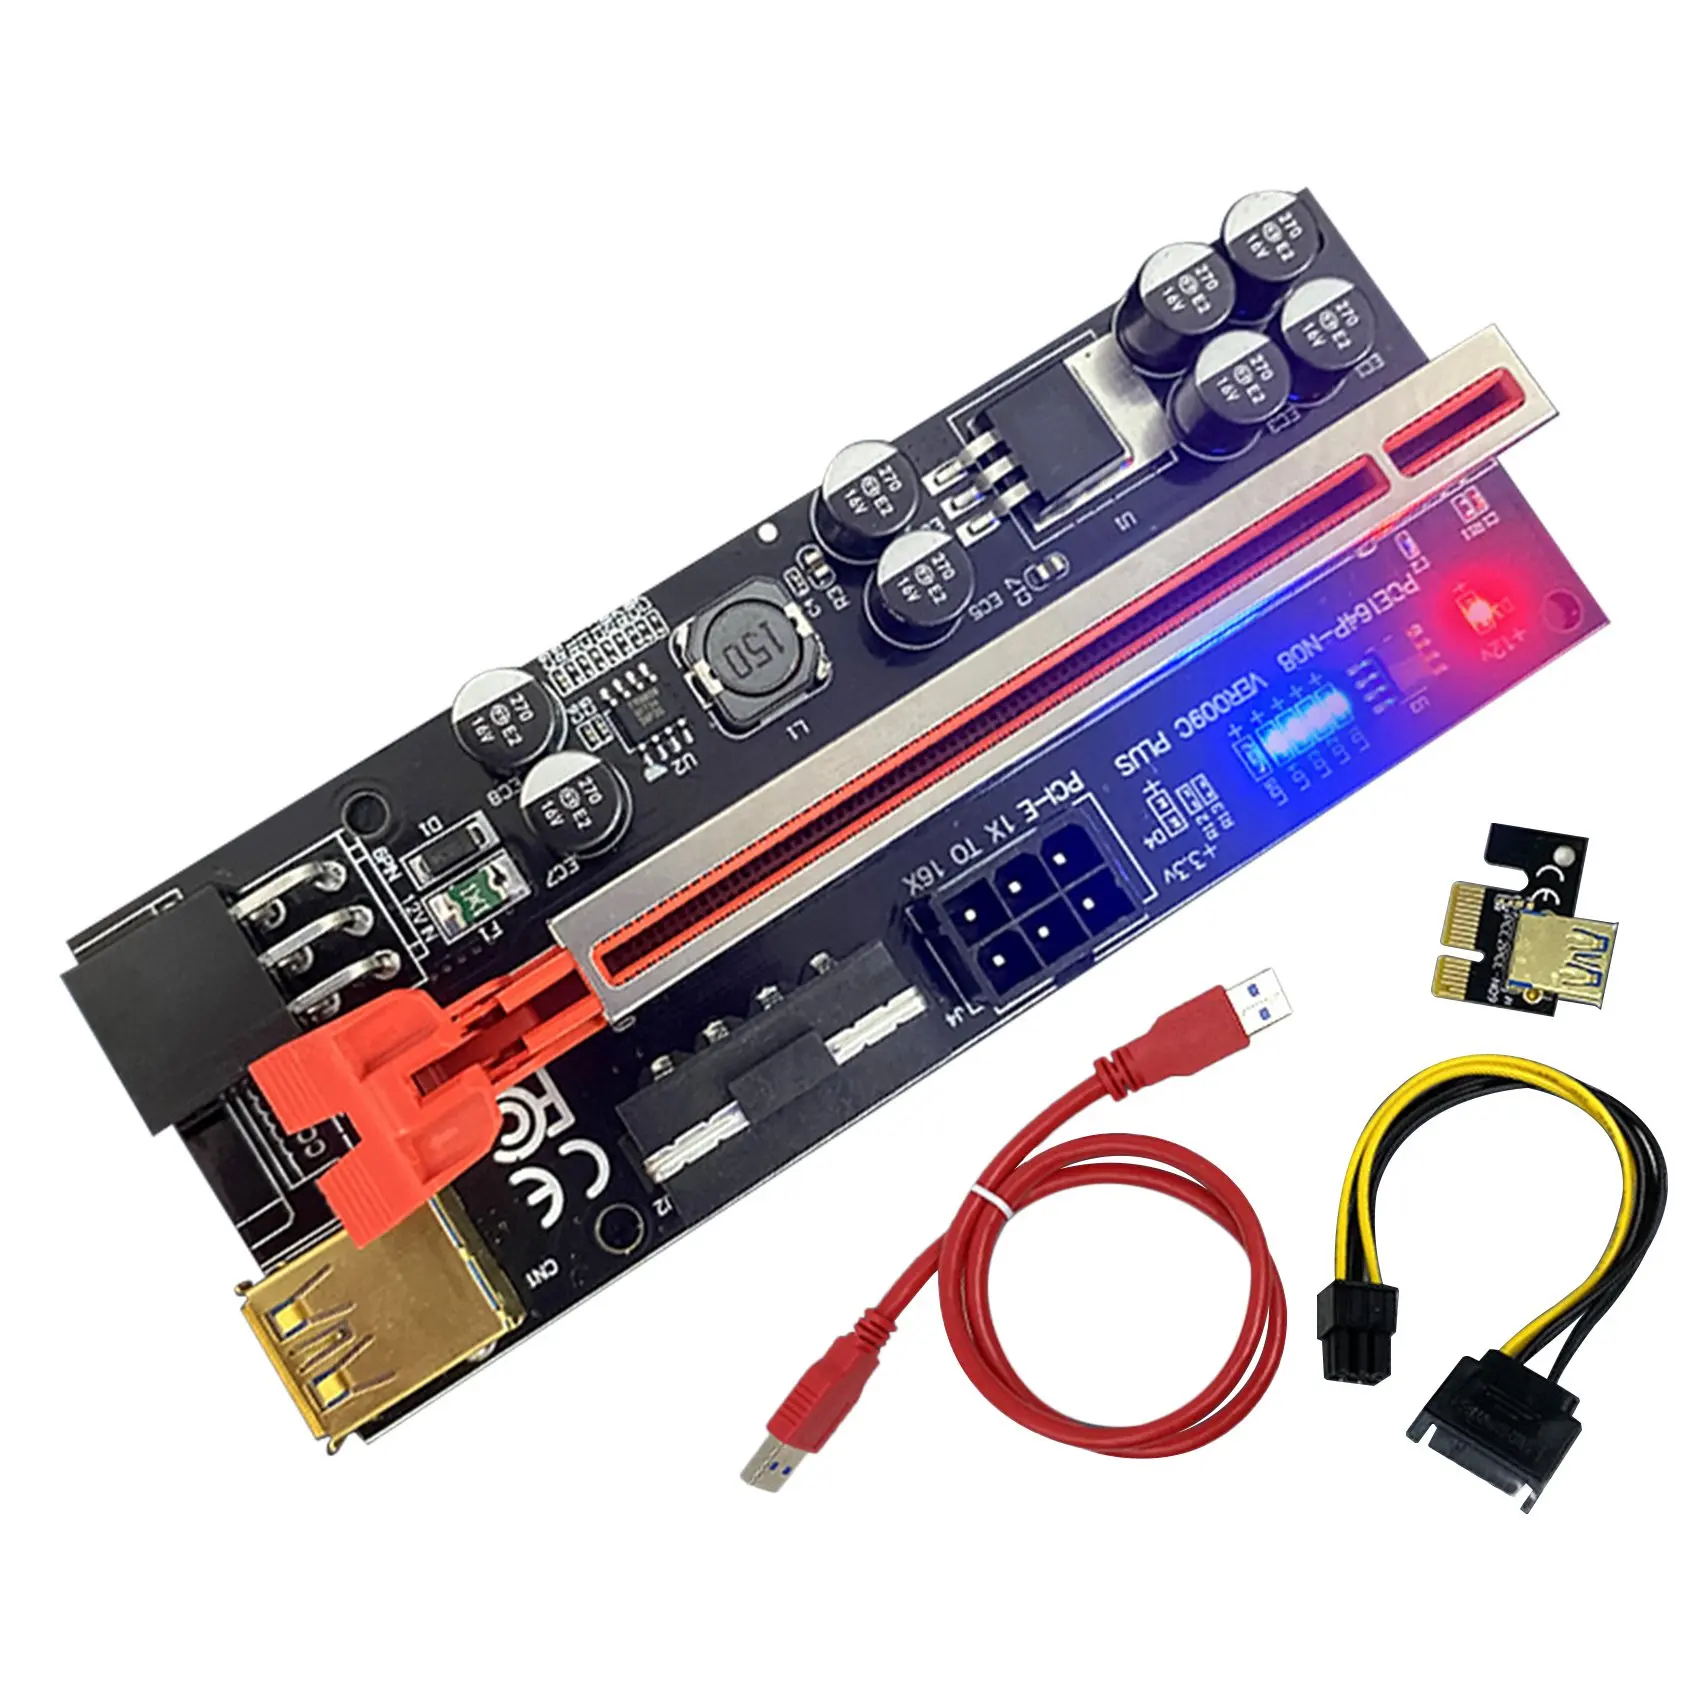 

VER009 Plus SATA Card Adapter with LED Light 8 Solid Capacitors PCIE 1X to 16X PCI-E Riser Card Extender USB 3.0 Cable